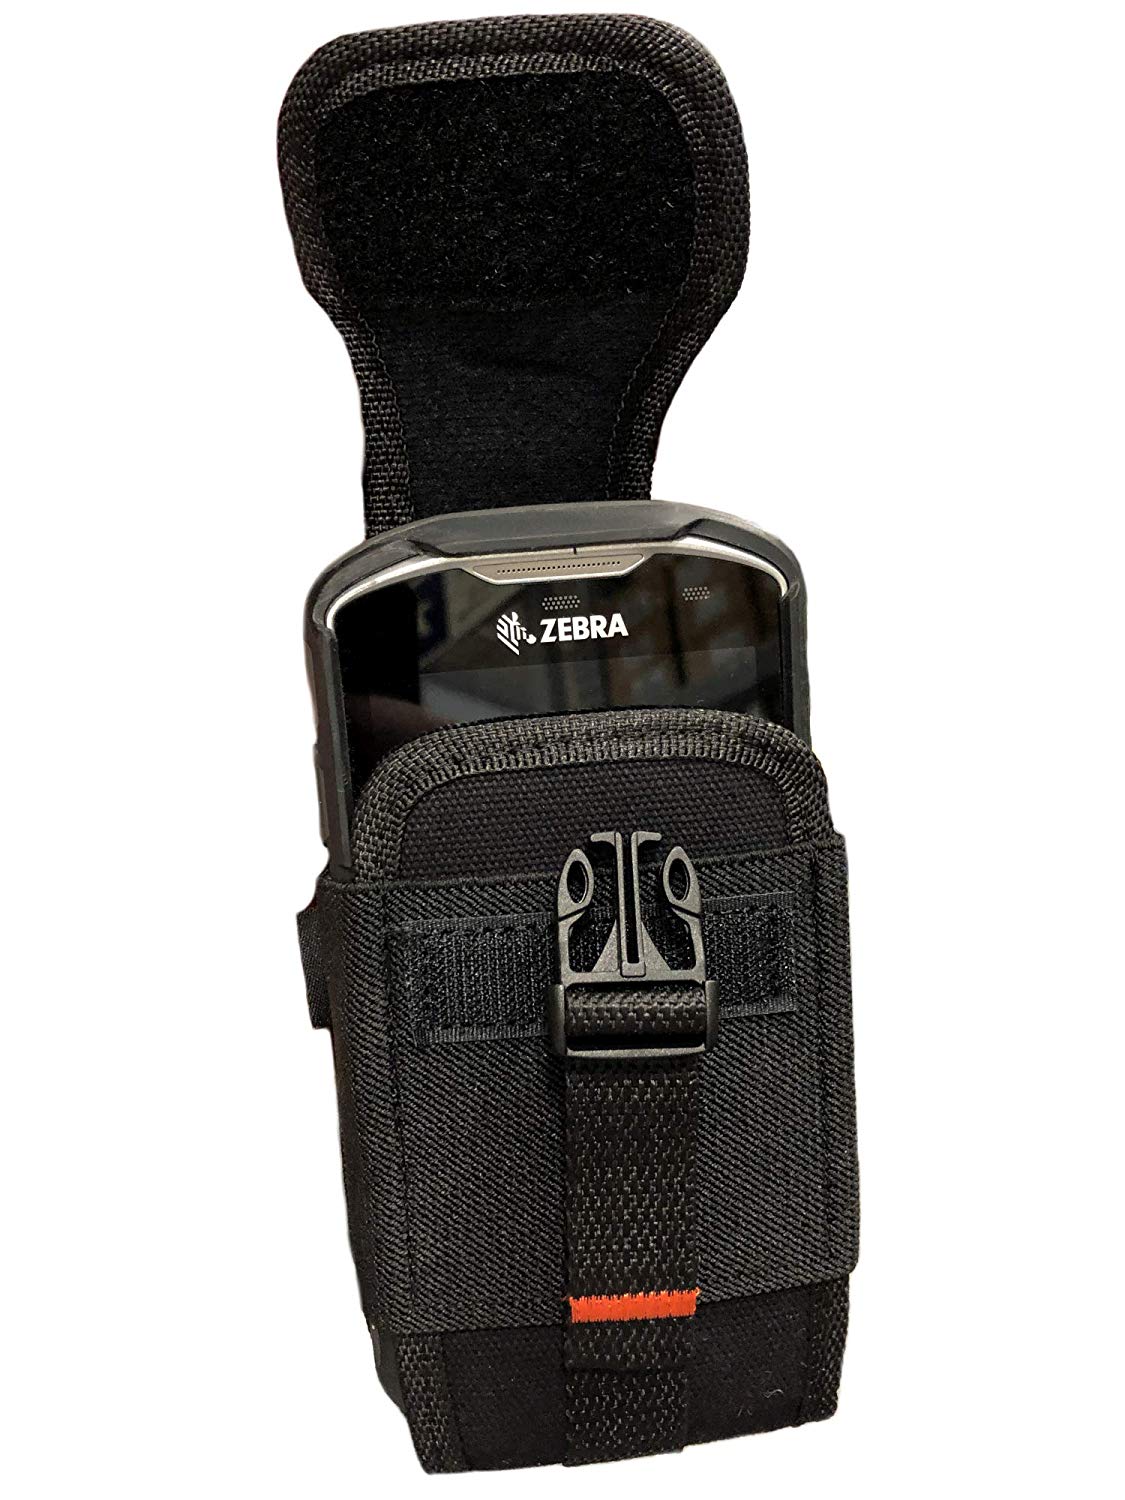 zebra symbol cs4070 case holster pouch cover rugged accessories